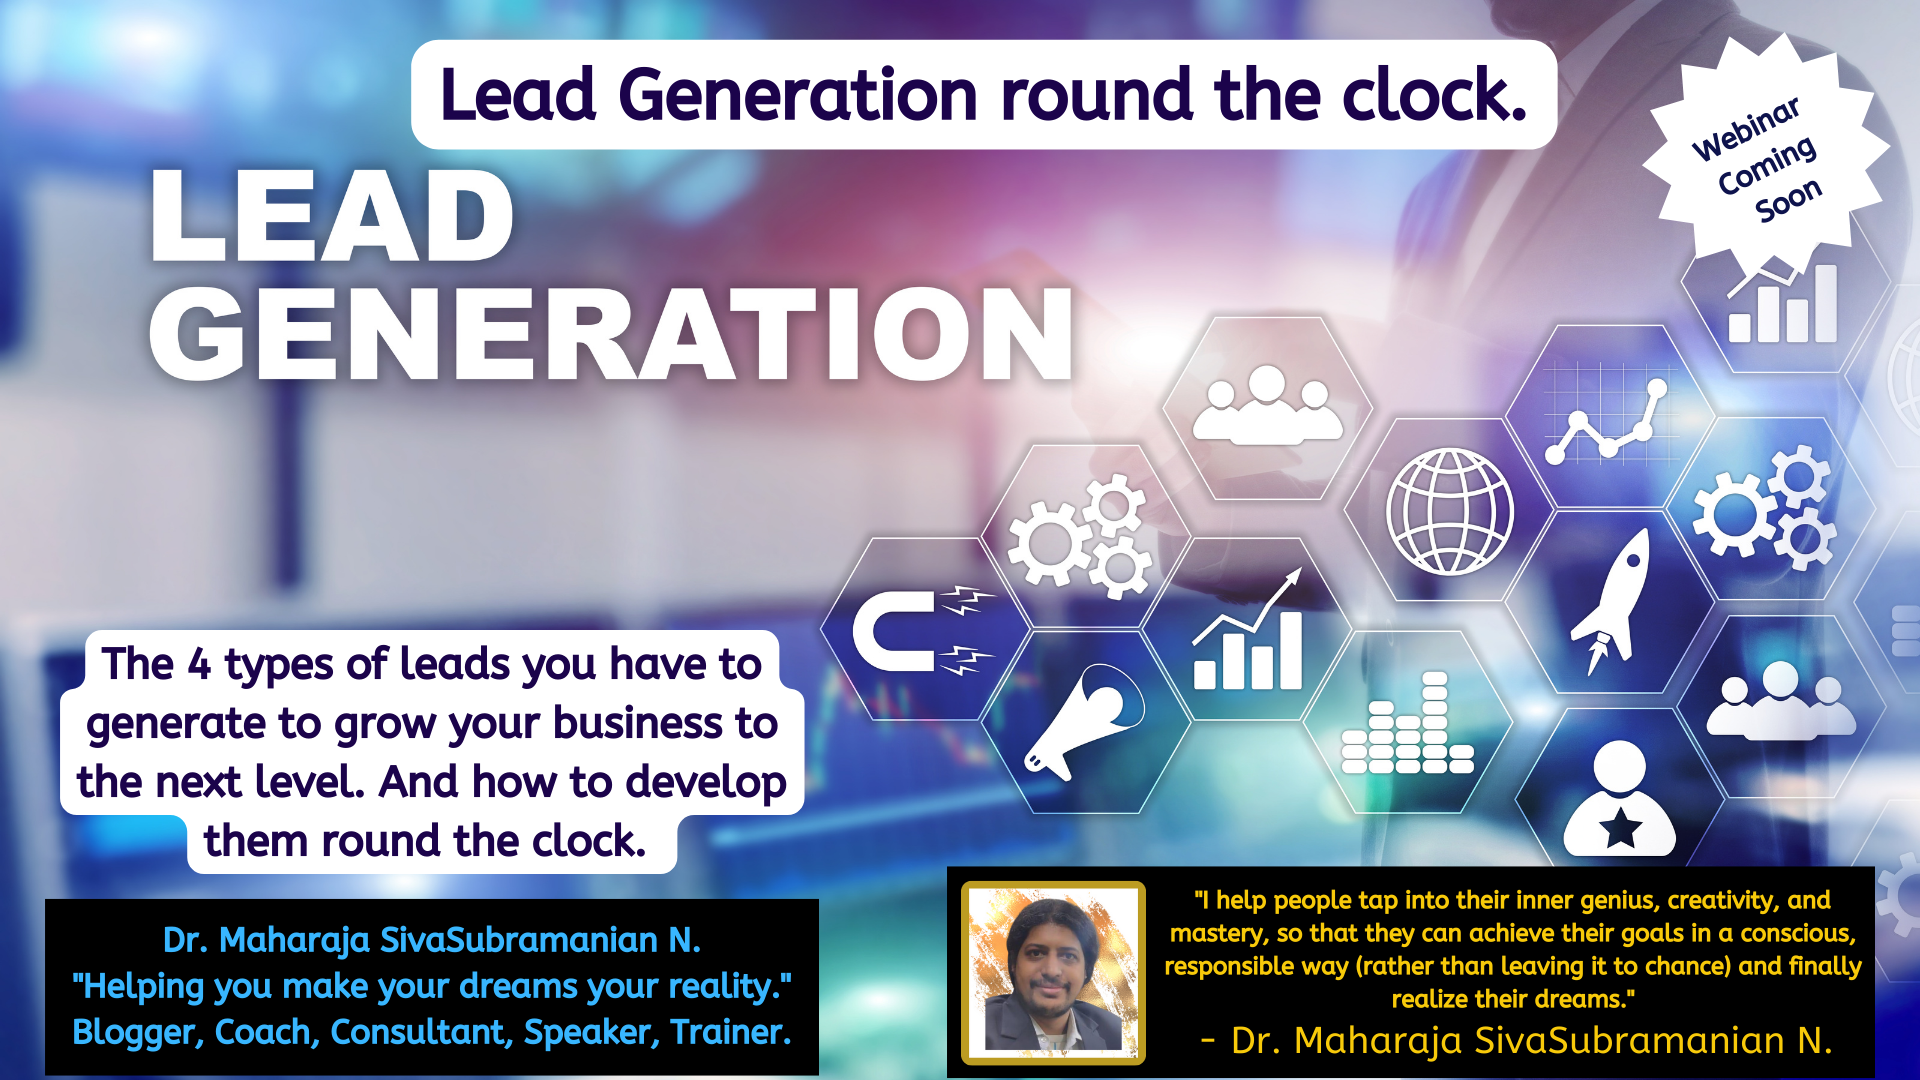 Lead Generation round the clock for marketing professionals. – Upcoming free webinar.